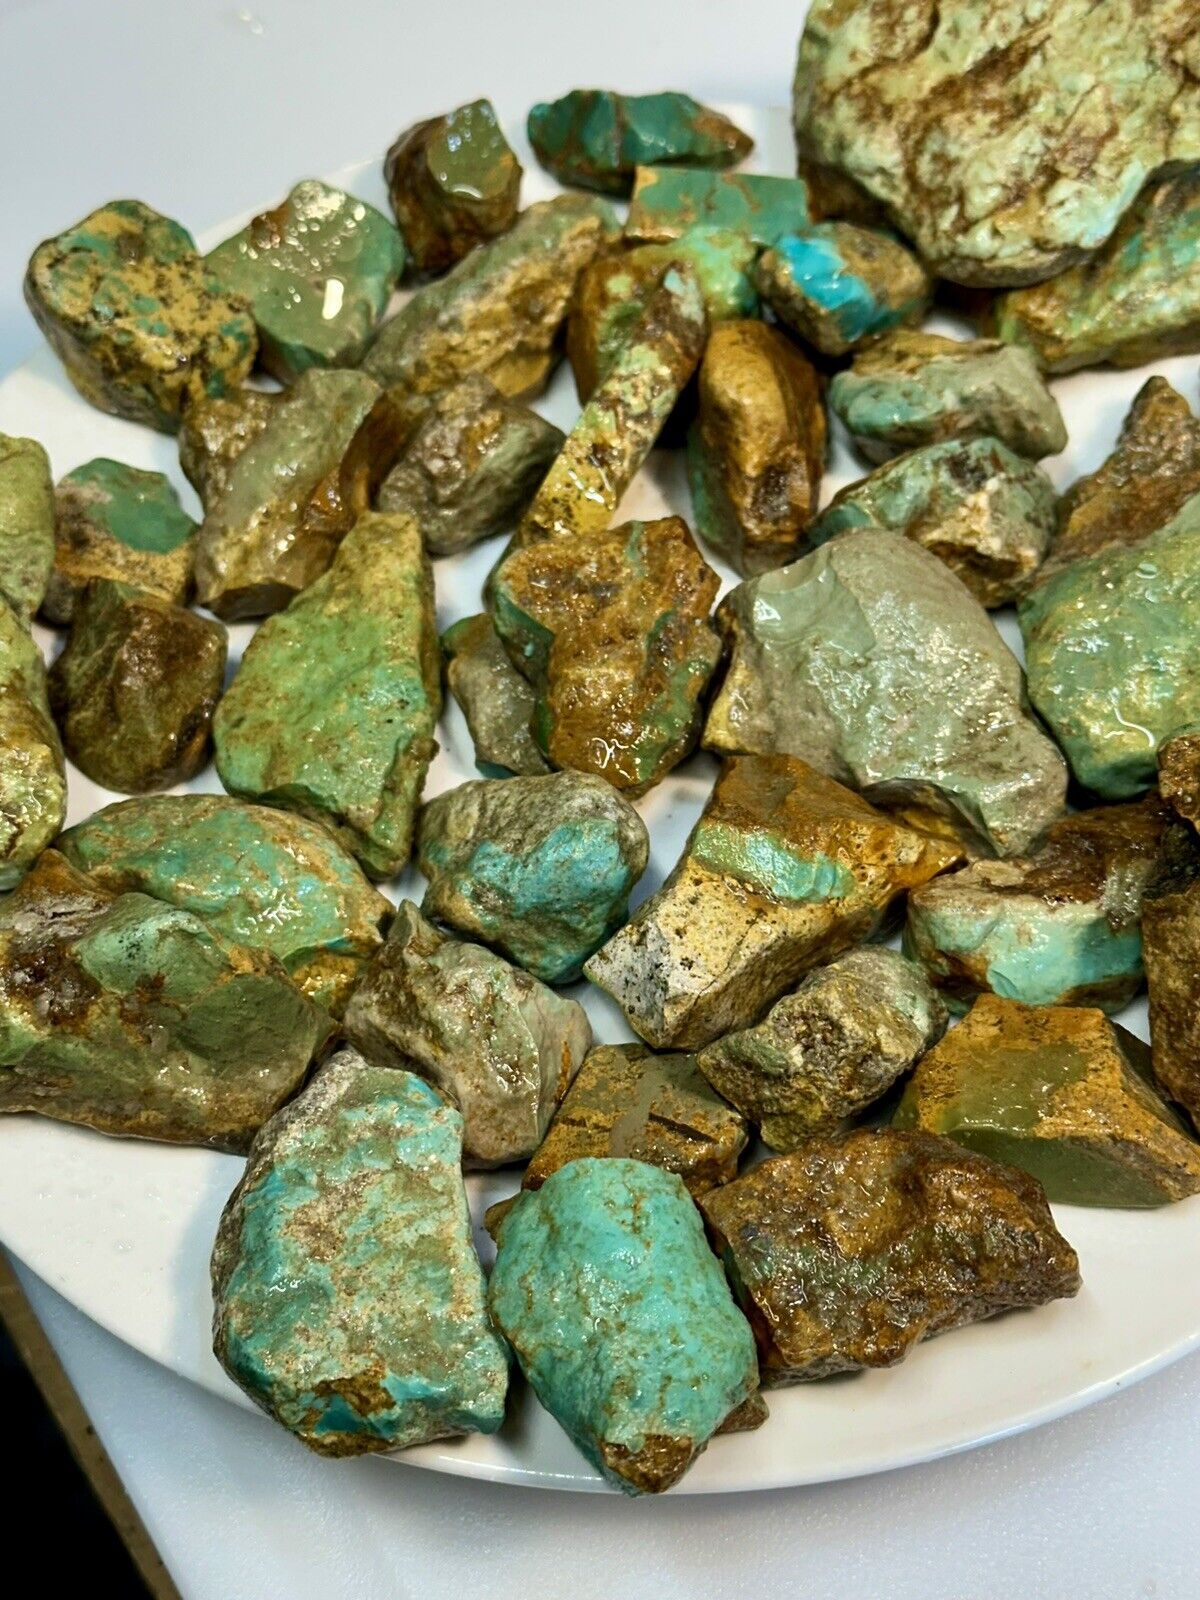 Old Hardy Pit Turquoise Nugs. 1 Pound of Amazing LW Hardy pics from HIS stash